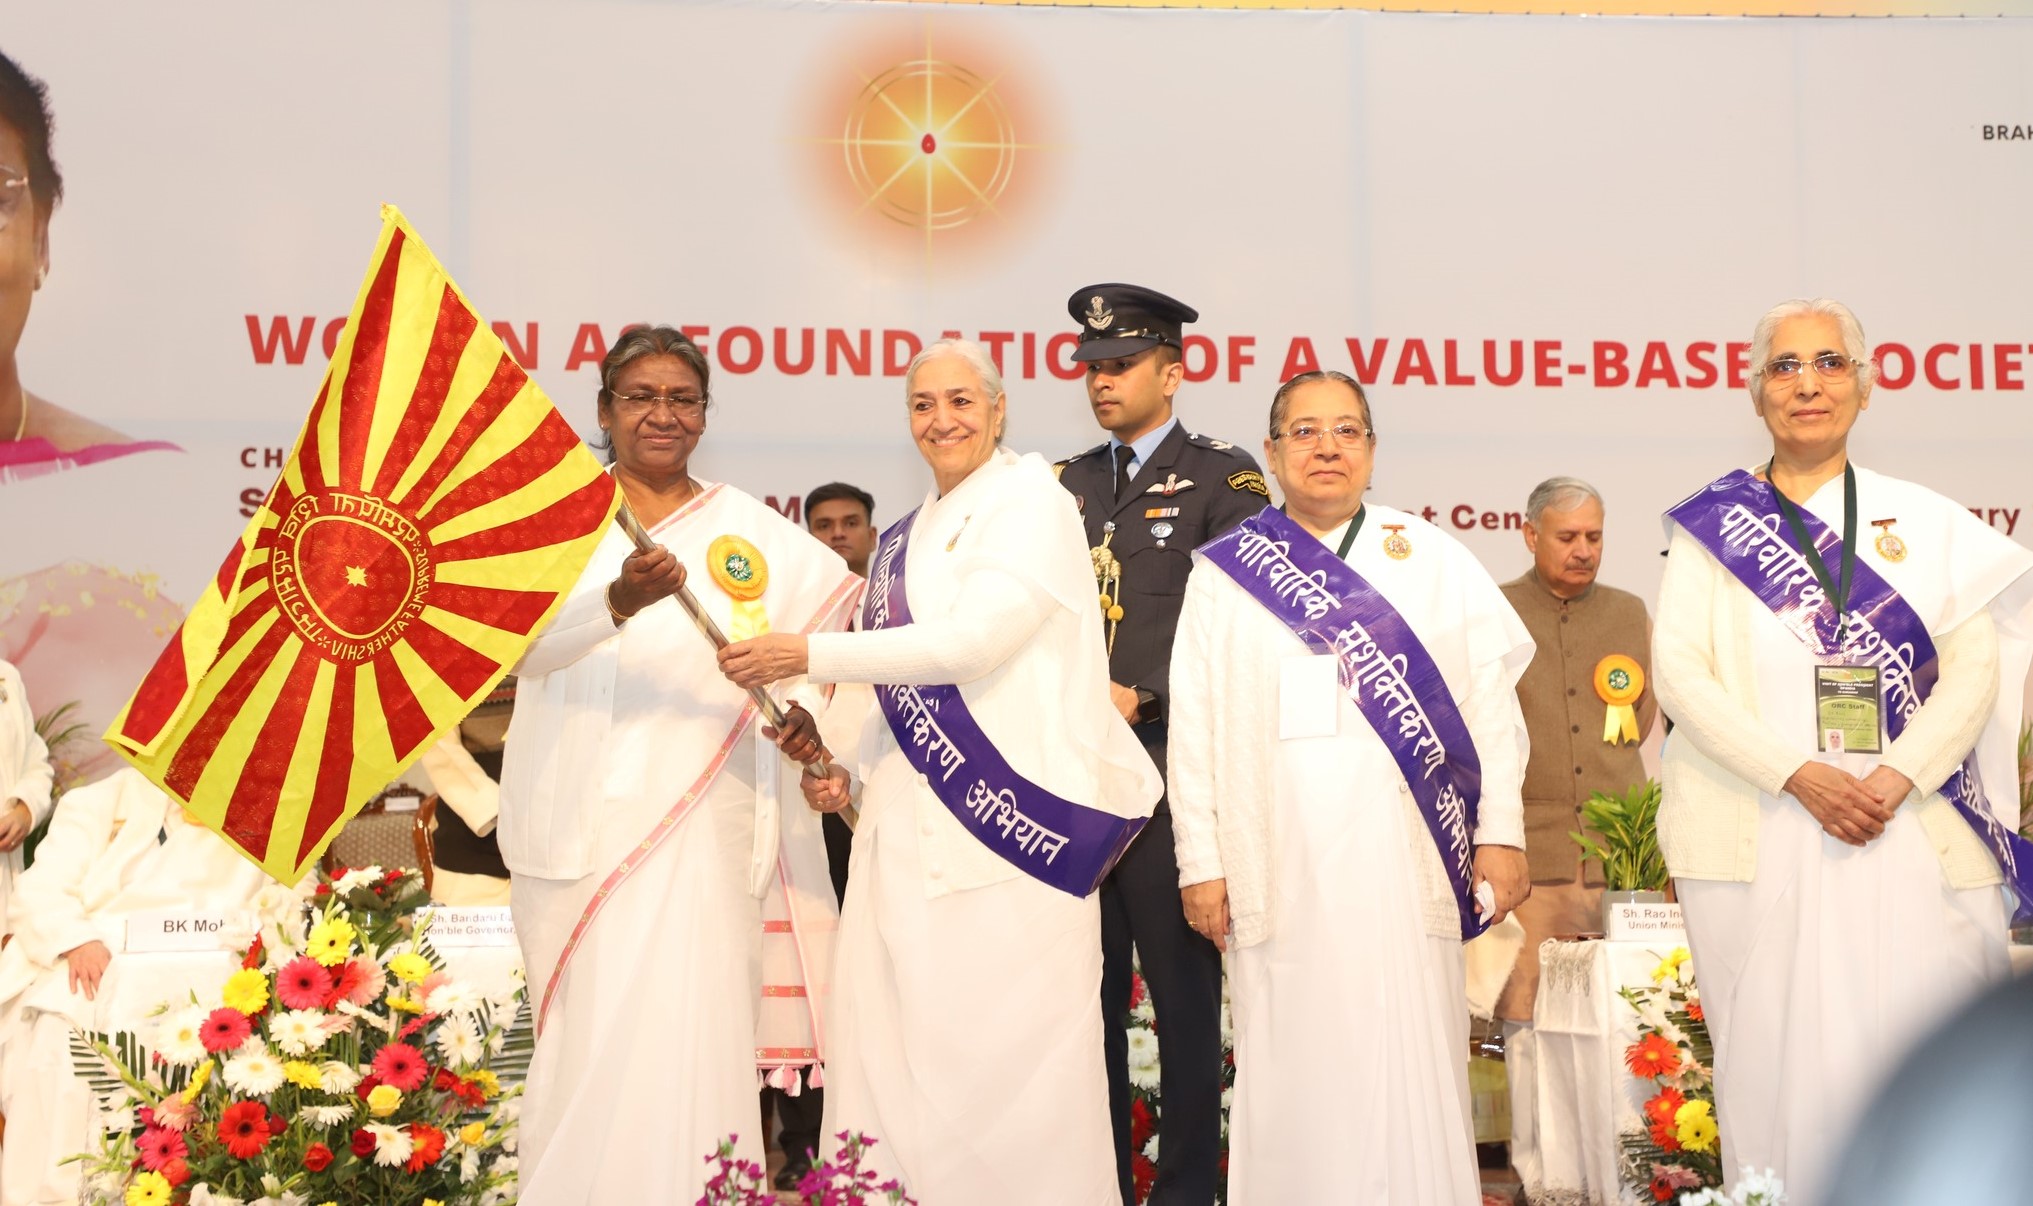 National Convention of Women on the visit of Smt. Droupadi Murmu, President of India